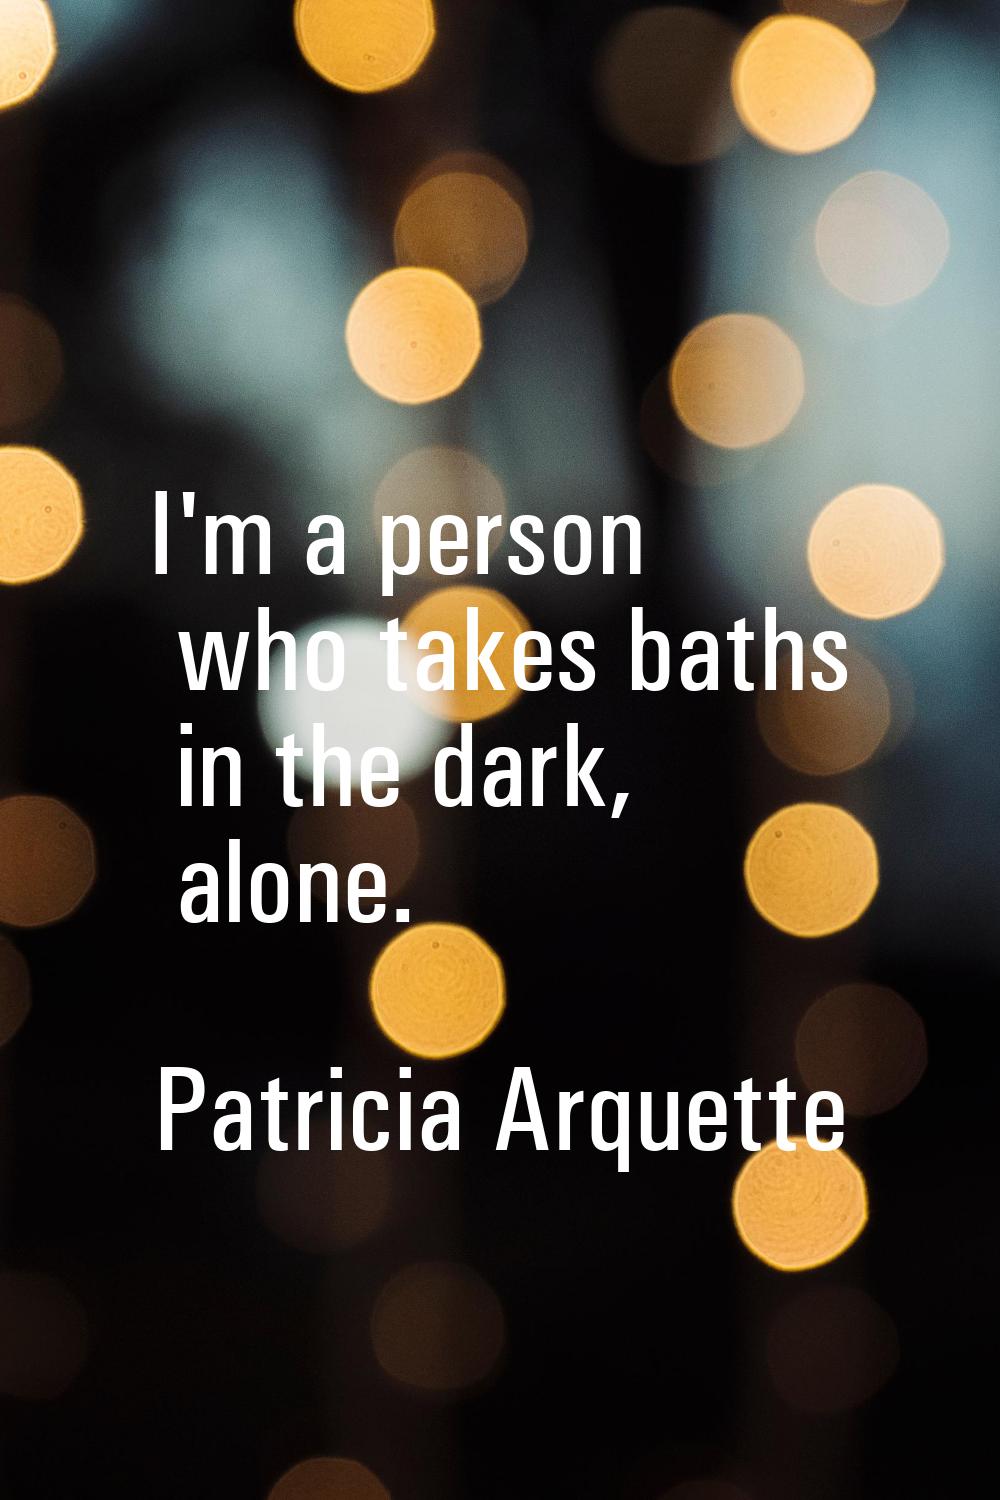 I'm a person who takes baths in the dark, alone.